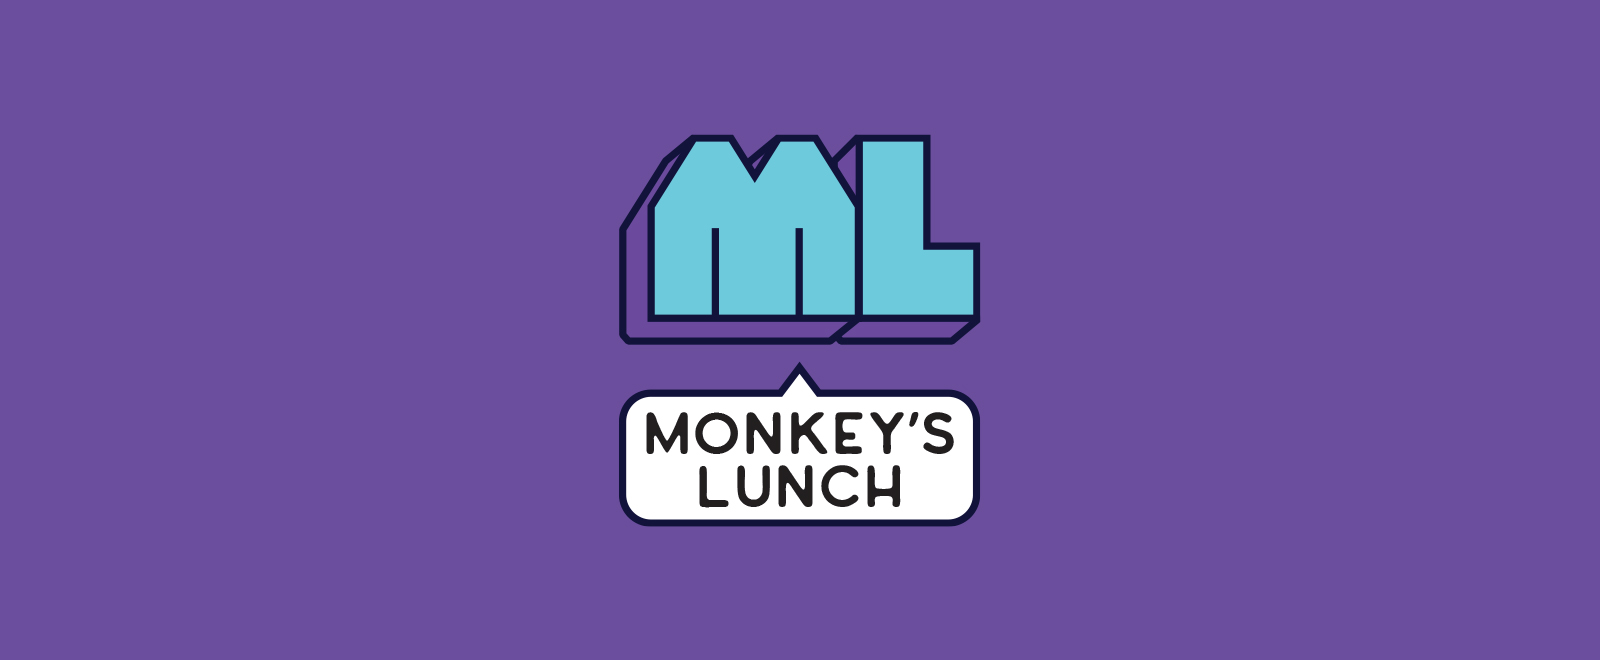 Bug & Claw is now a part of Monkey's Lunch!